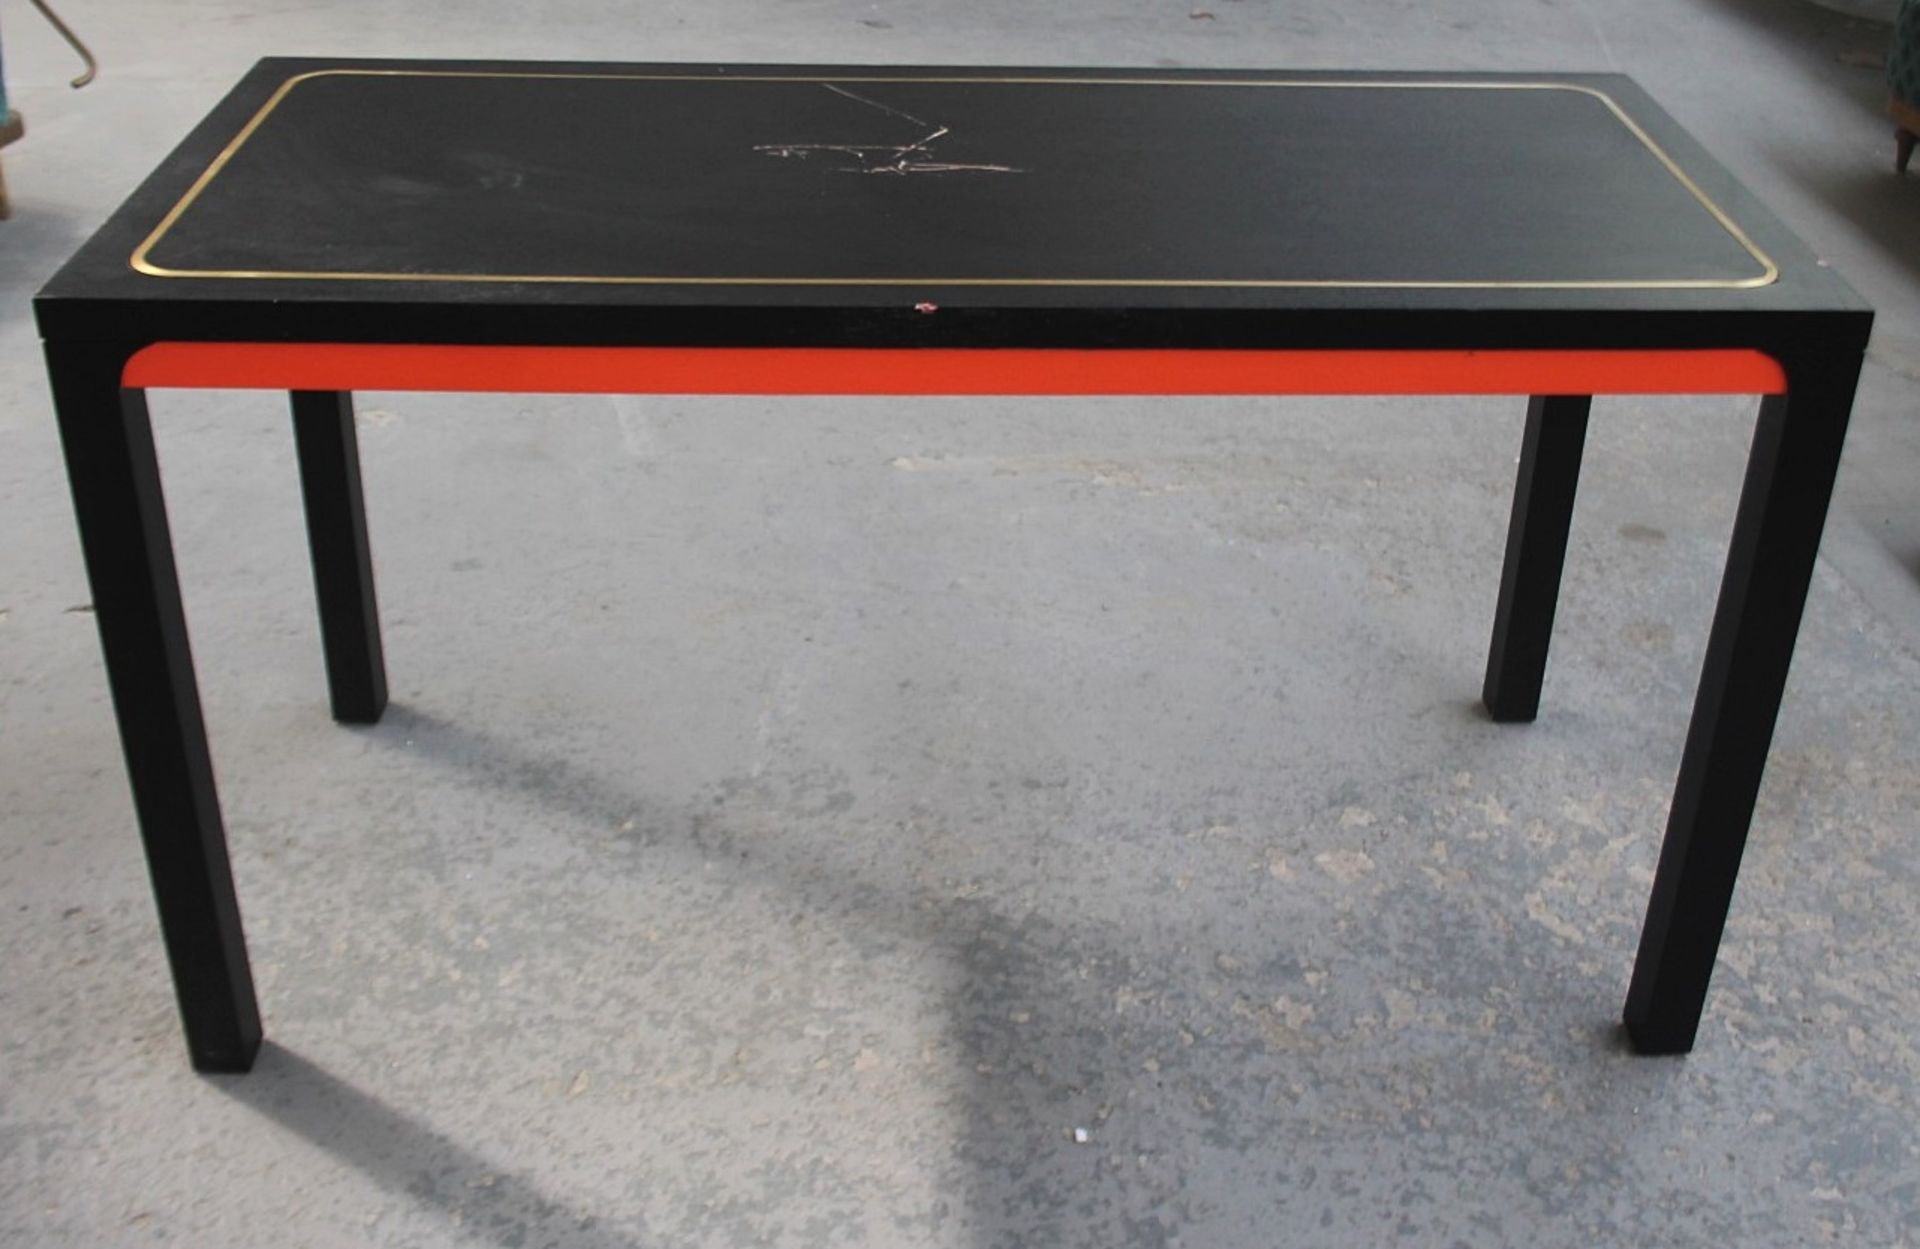 1 x Shanghai Tang Wooden Display Table In Black With Brass Inlay - Recently Removed From A World- - Image 6 of 7